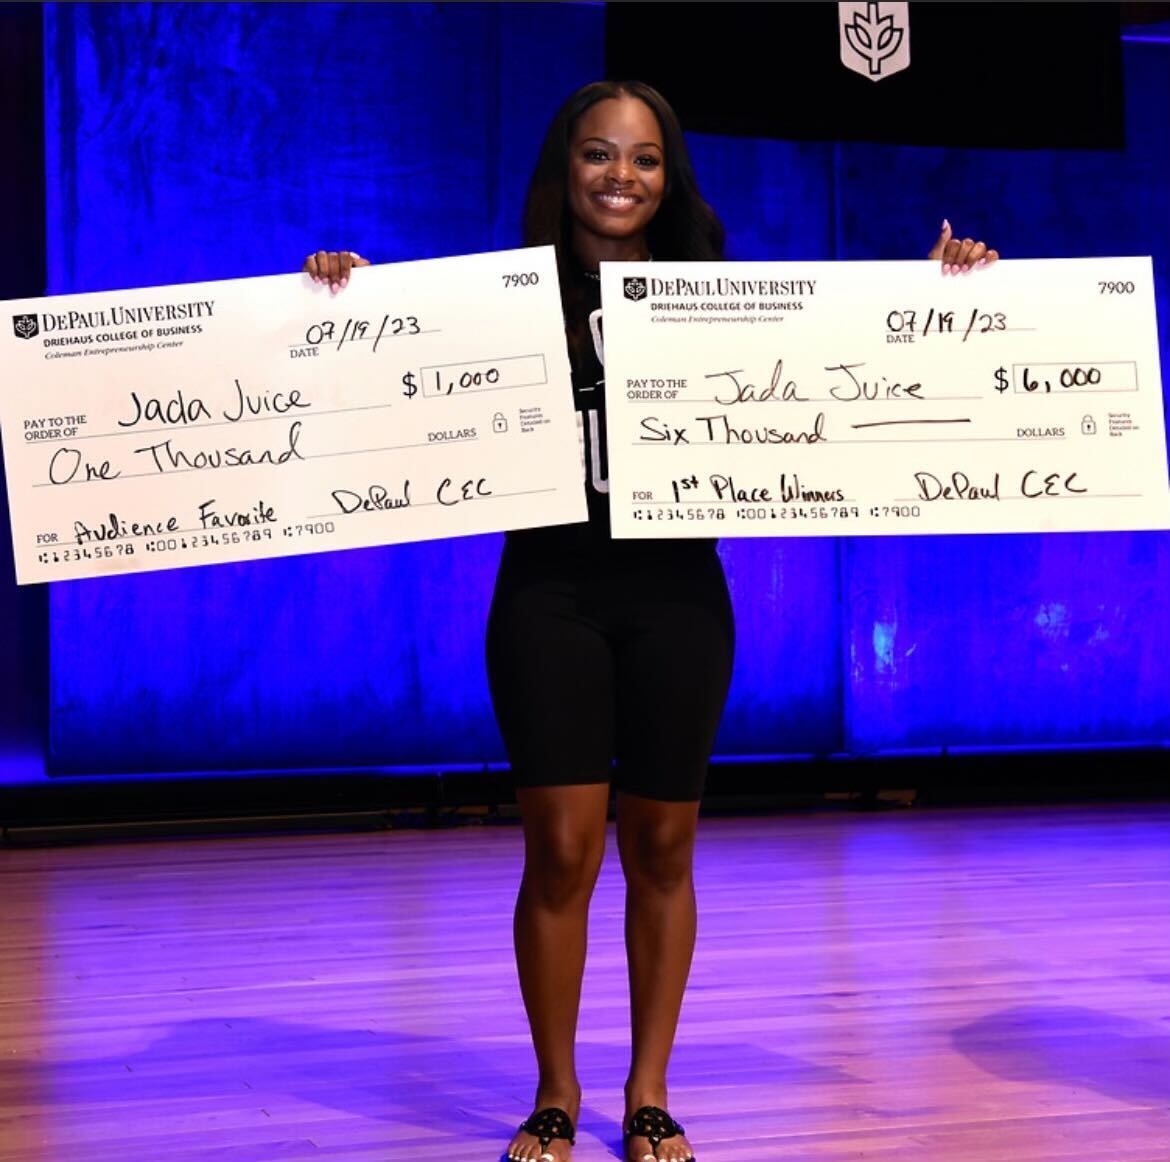 Jada Samuels holds her checks for $7,000 from the University Pitch Madness competition. Samuels is the CEO of Jada Juice, an all-natural smoothie company. (Courtesy of Jada Samuels)